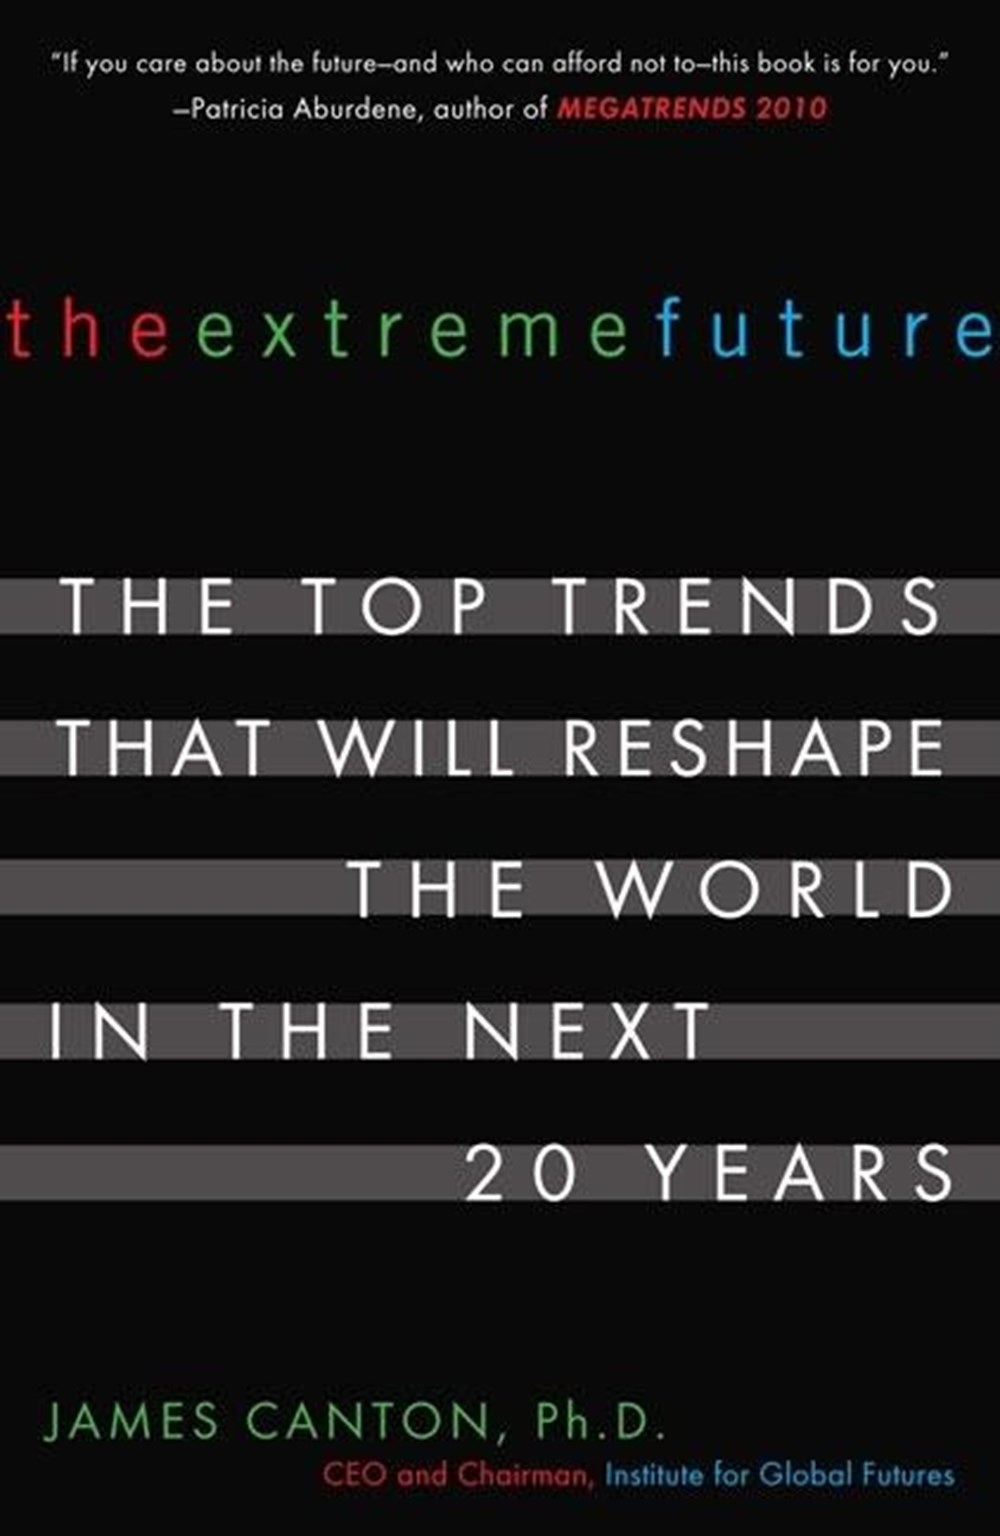 Extreme Future: The Top Trends That Will Reshape the World in the Next 20 Years